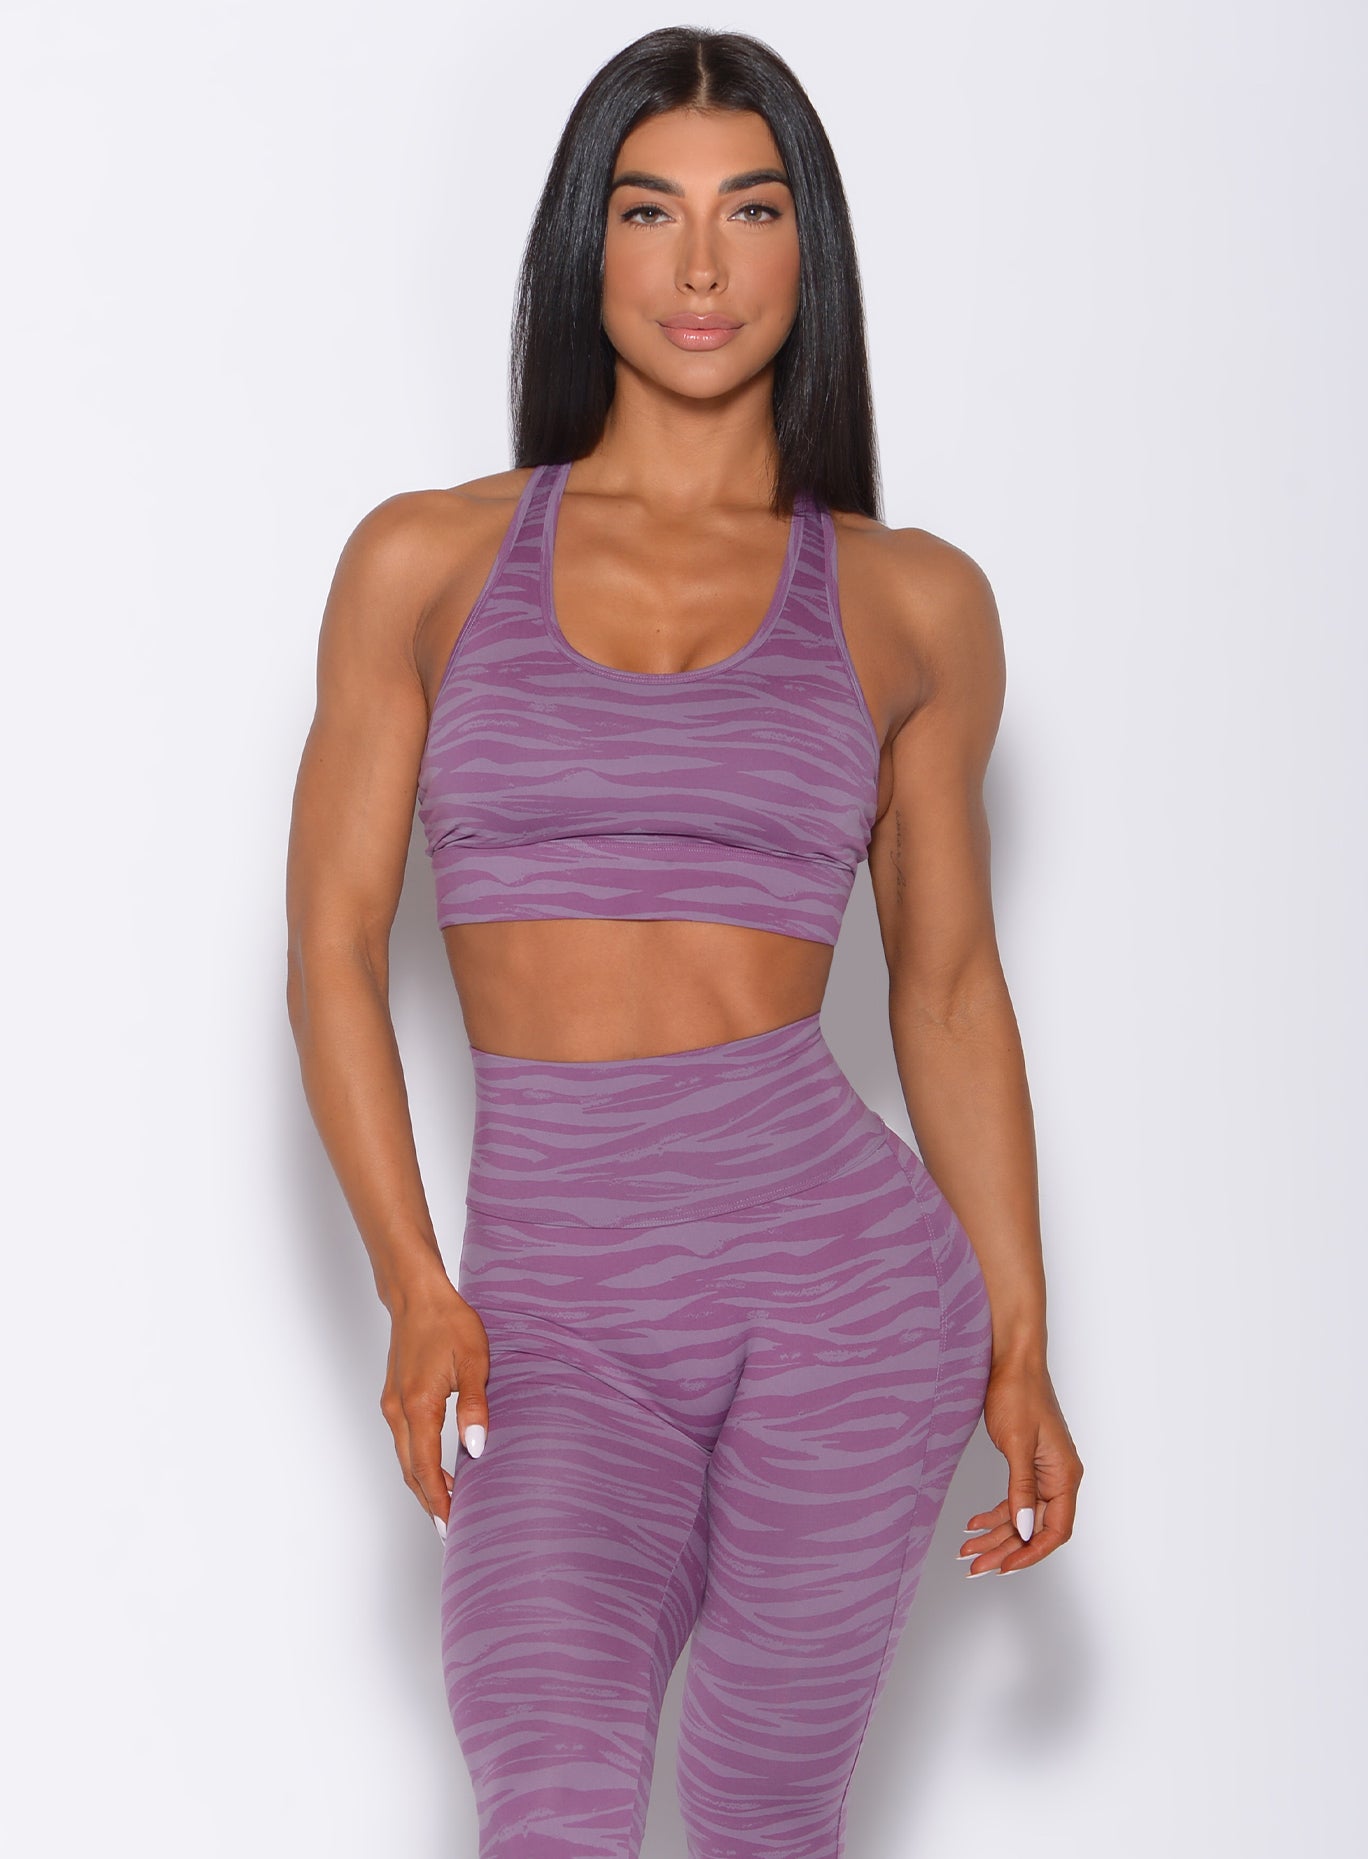 Front  profile view of a model in our tiger printed rival sports bra in orchid purple color and a matching sexy back leggings with criss cross straps at the back